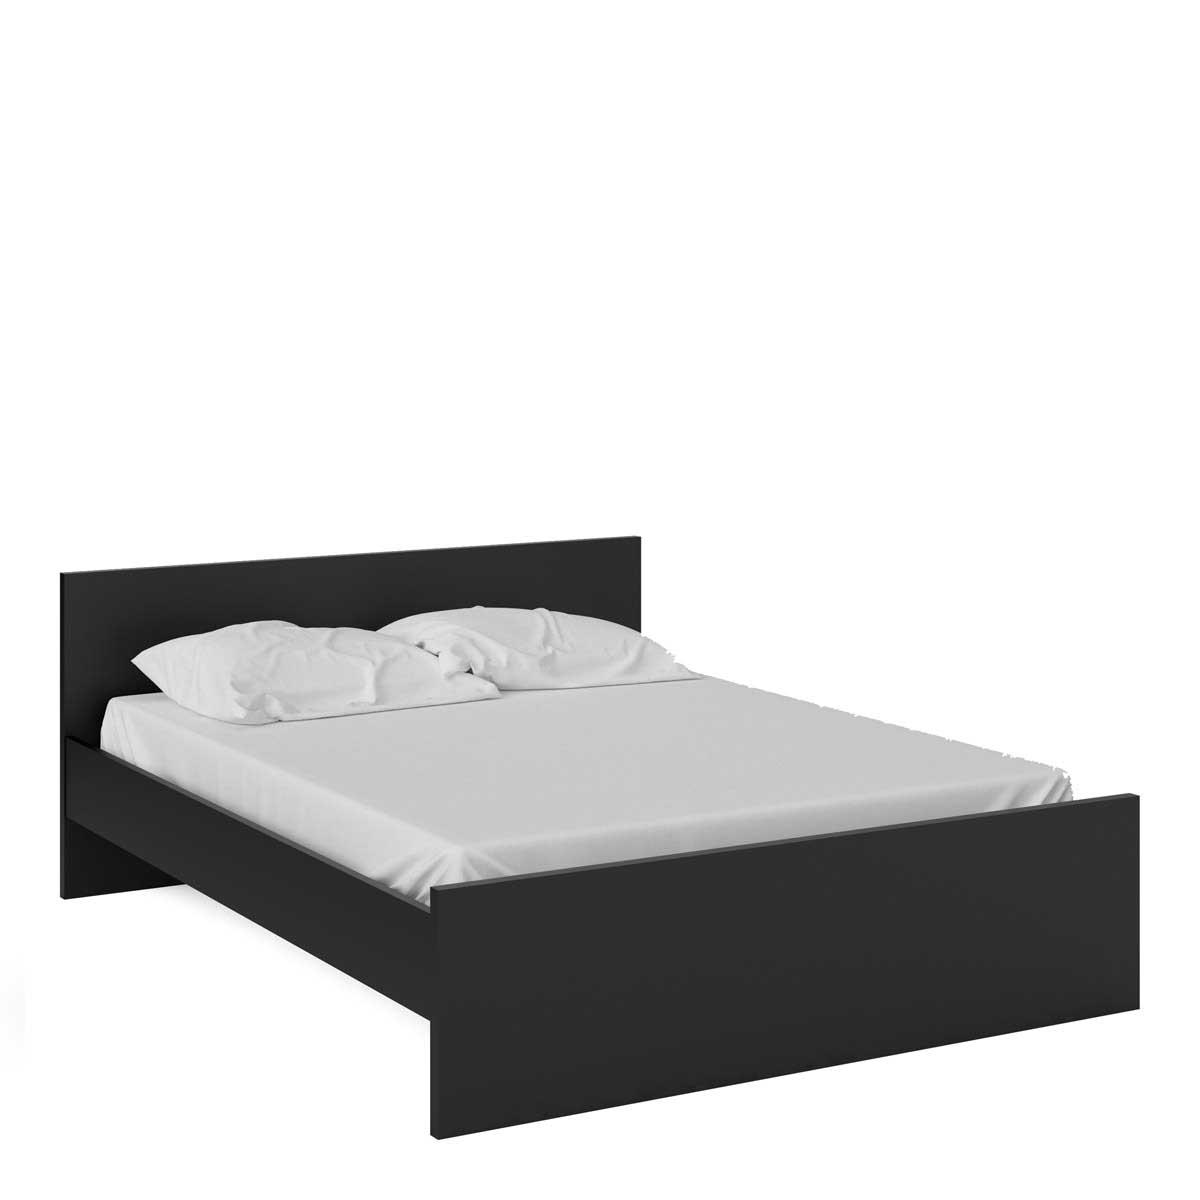 Naia Euro King Bed 160 X 200 In Black, Euro King Size Bed Frame